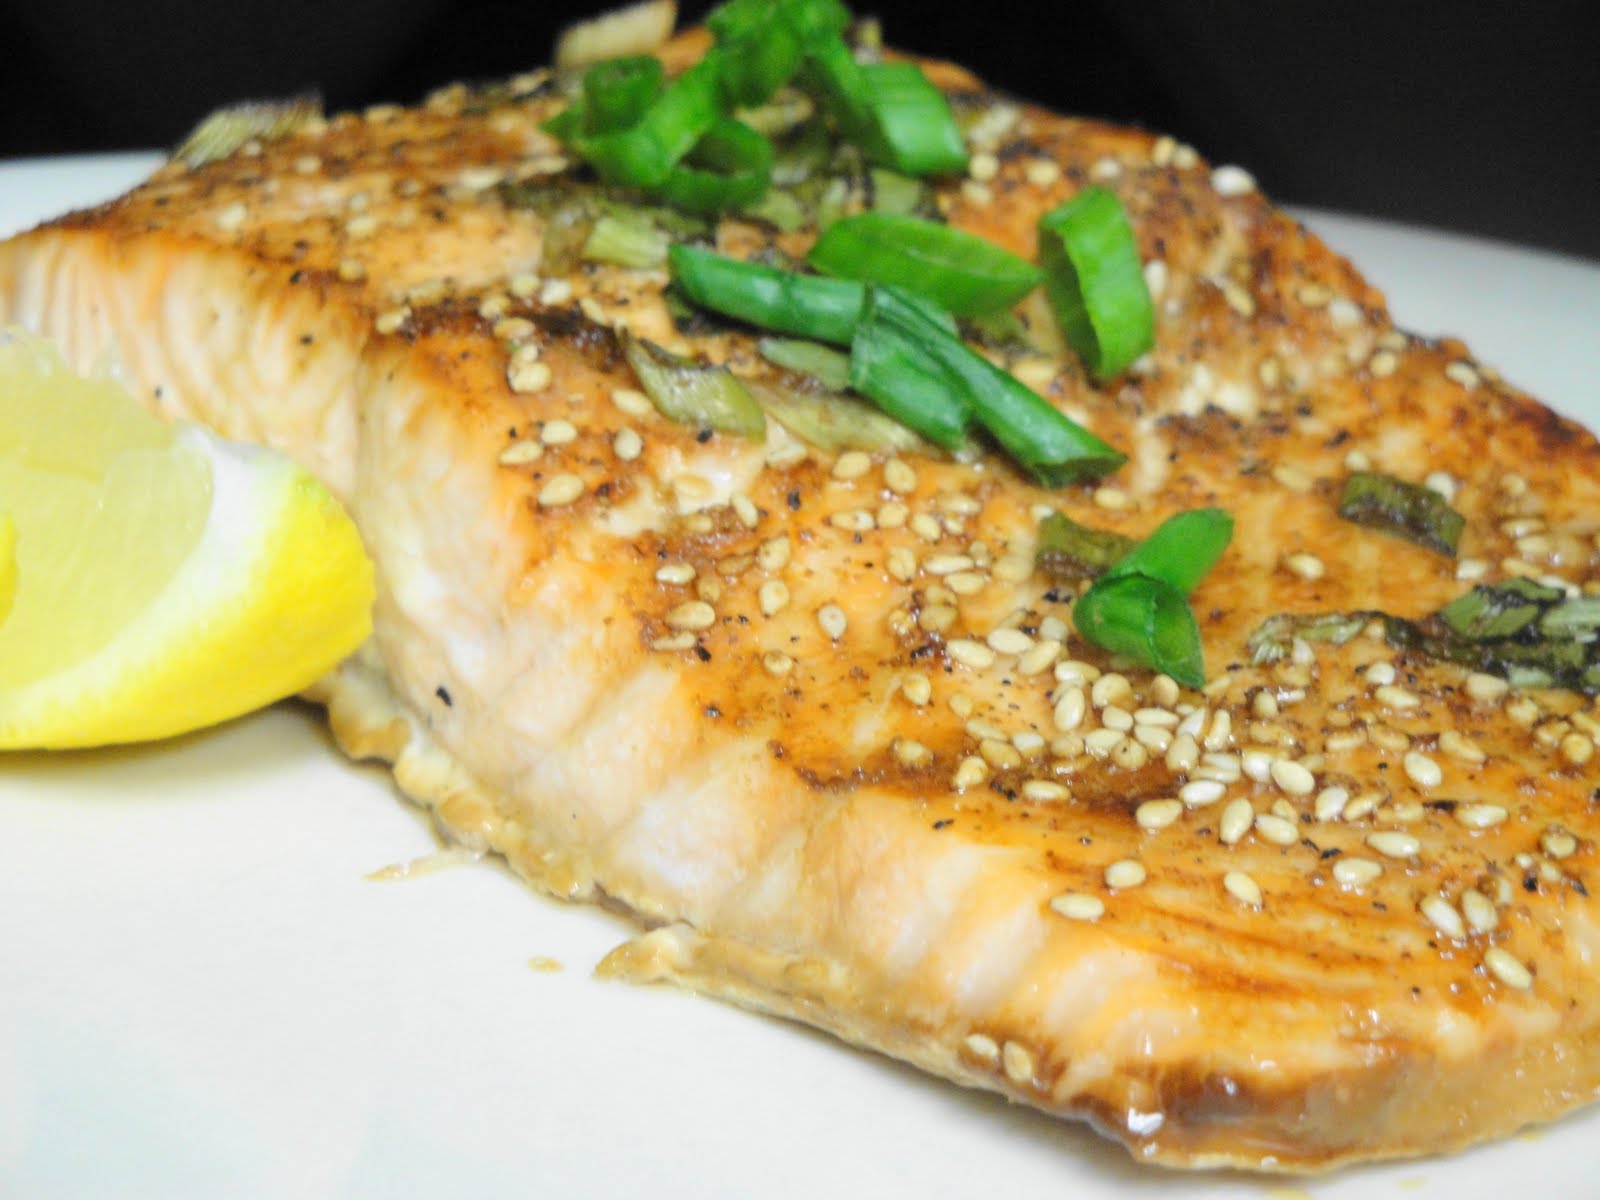 Just Dishin': Honey Soy Broiled Salmon